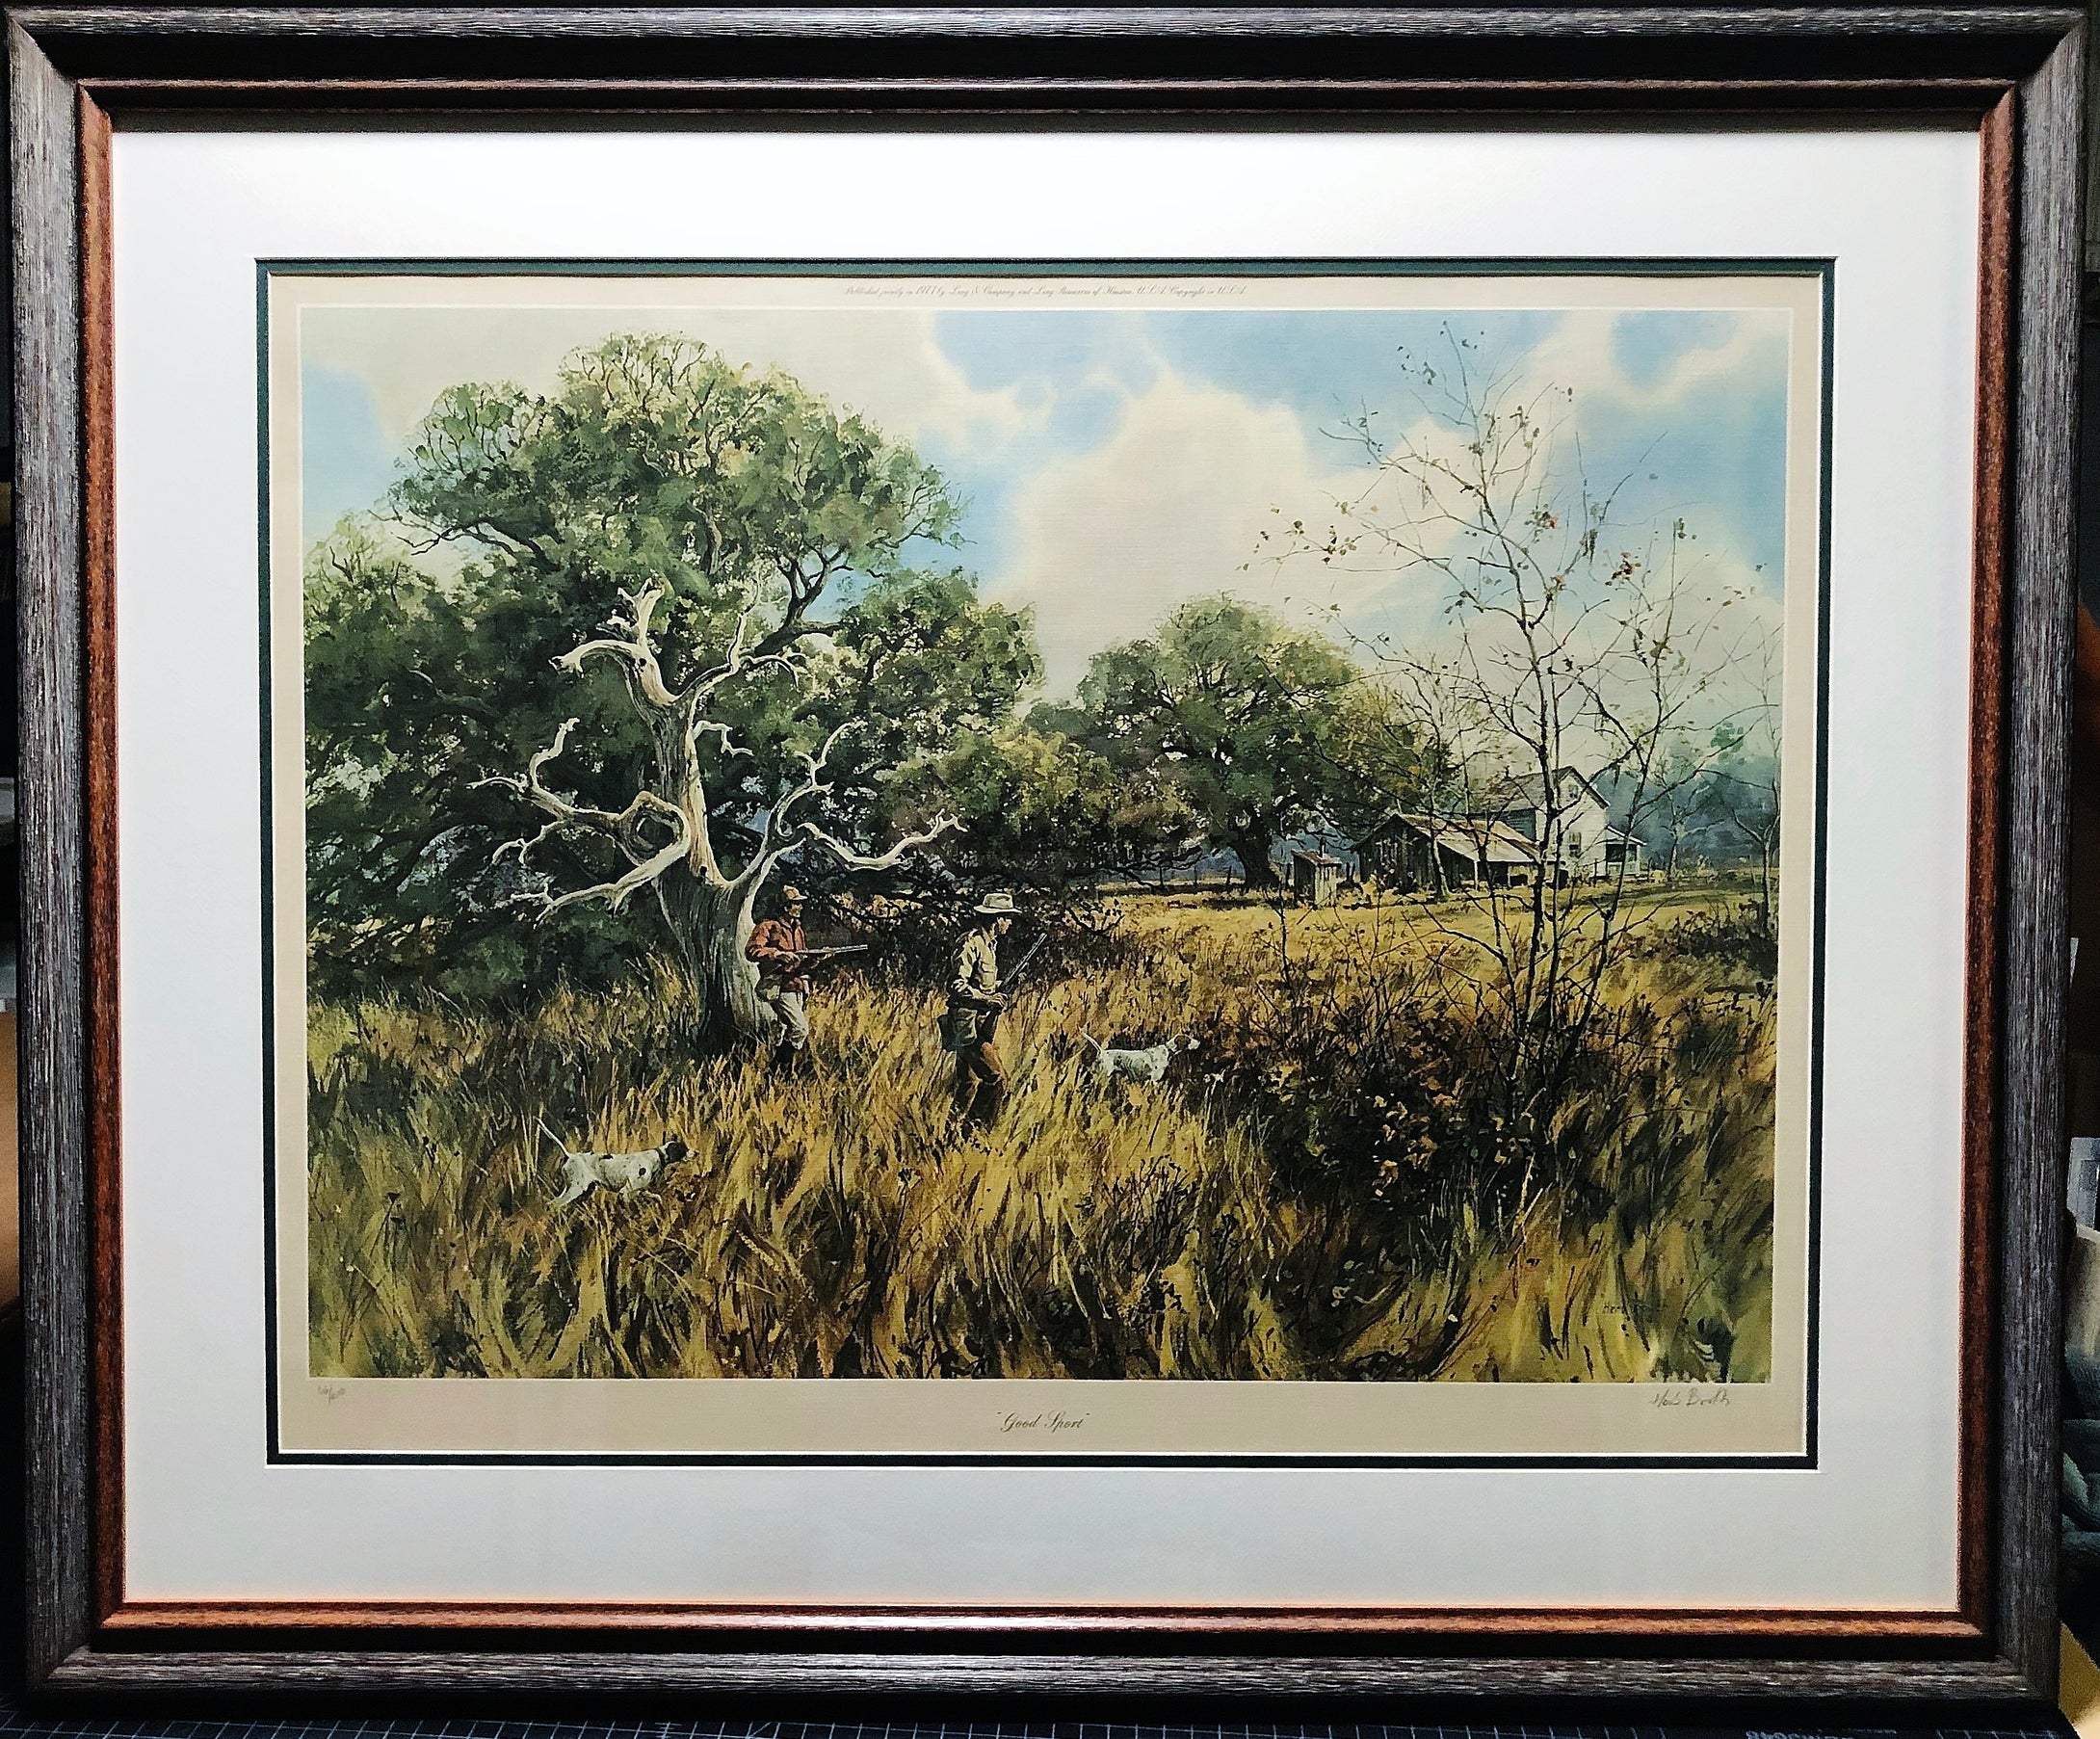 Herb Booth - Good Sport - Lithograph Quail Hunting Year 1977 - Brand New Custom Sporting Frame